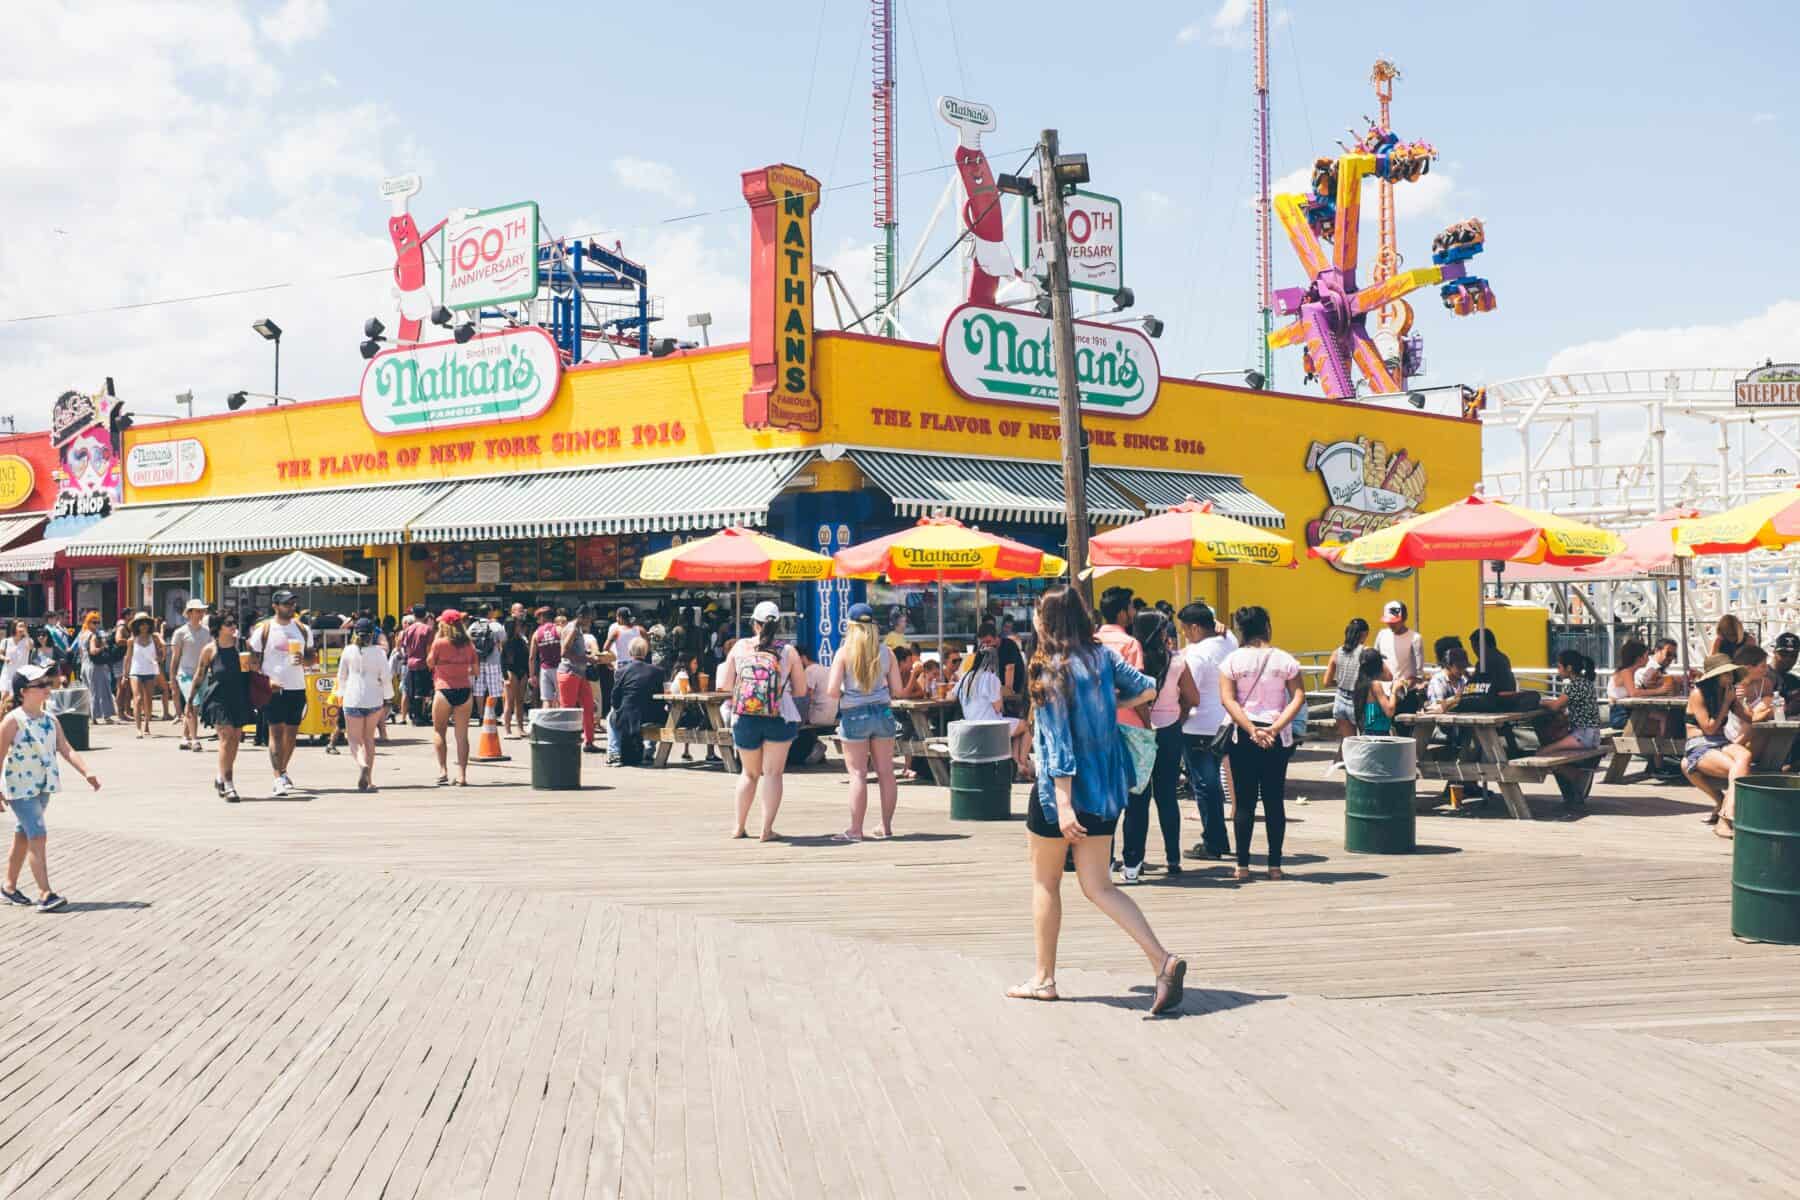 nathans in coney island 1